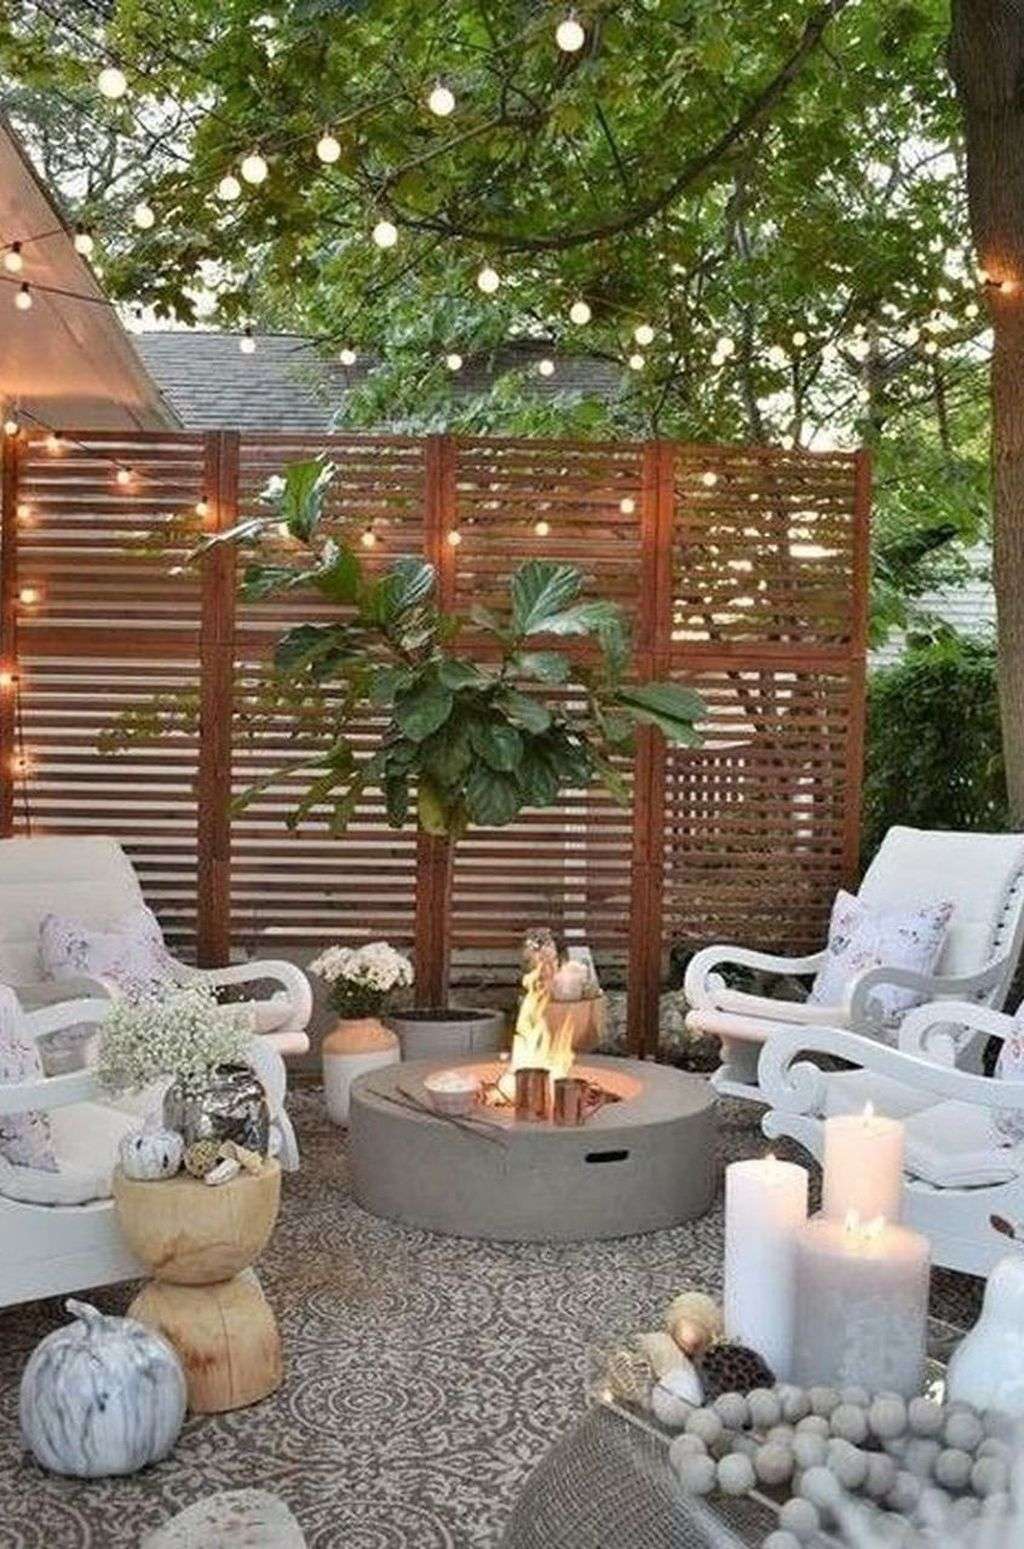 32 Awesome Small Backyard Design Ideas That Will Make Your ...